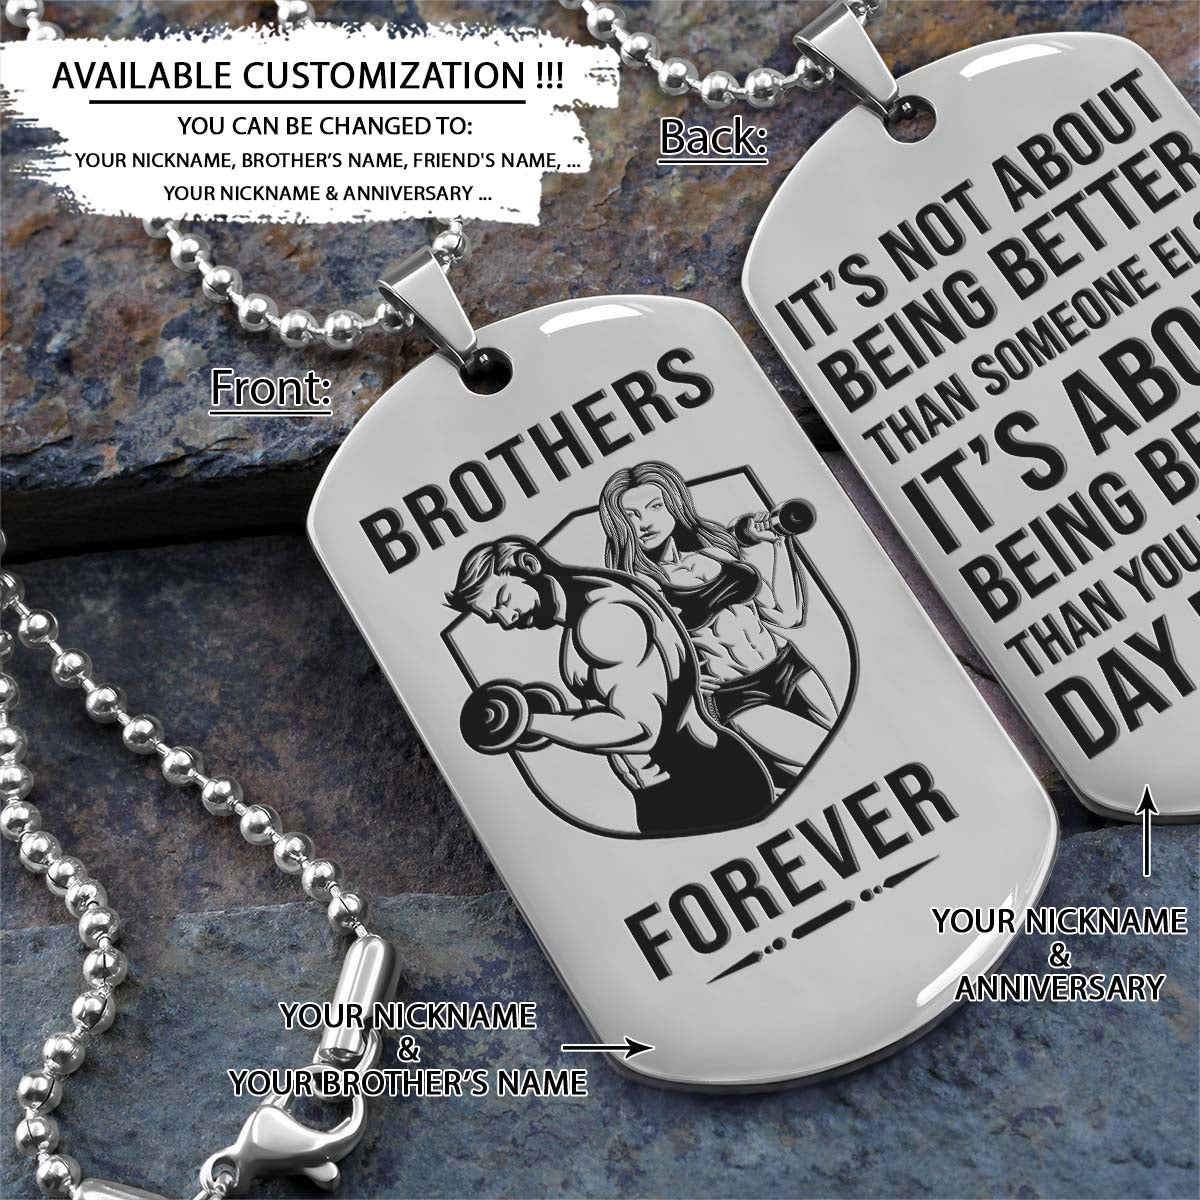 GYMD009 - Brothers Forever - It's About Being Better Than You Were The Day Before - Gym - Fitness Center - Workout - Gym Dog Tag - Gym Necklace - Silver Engrave Dog Tag